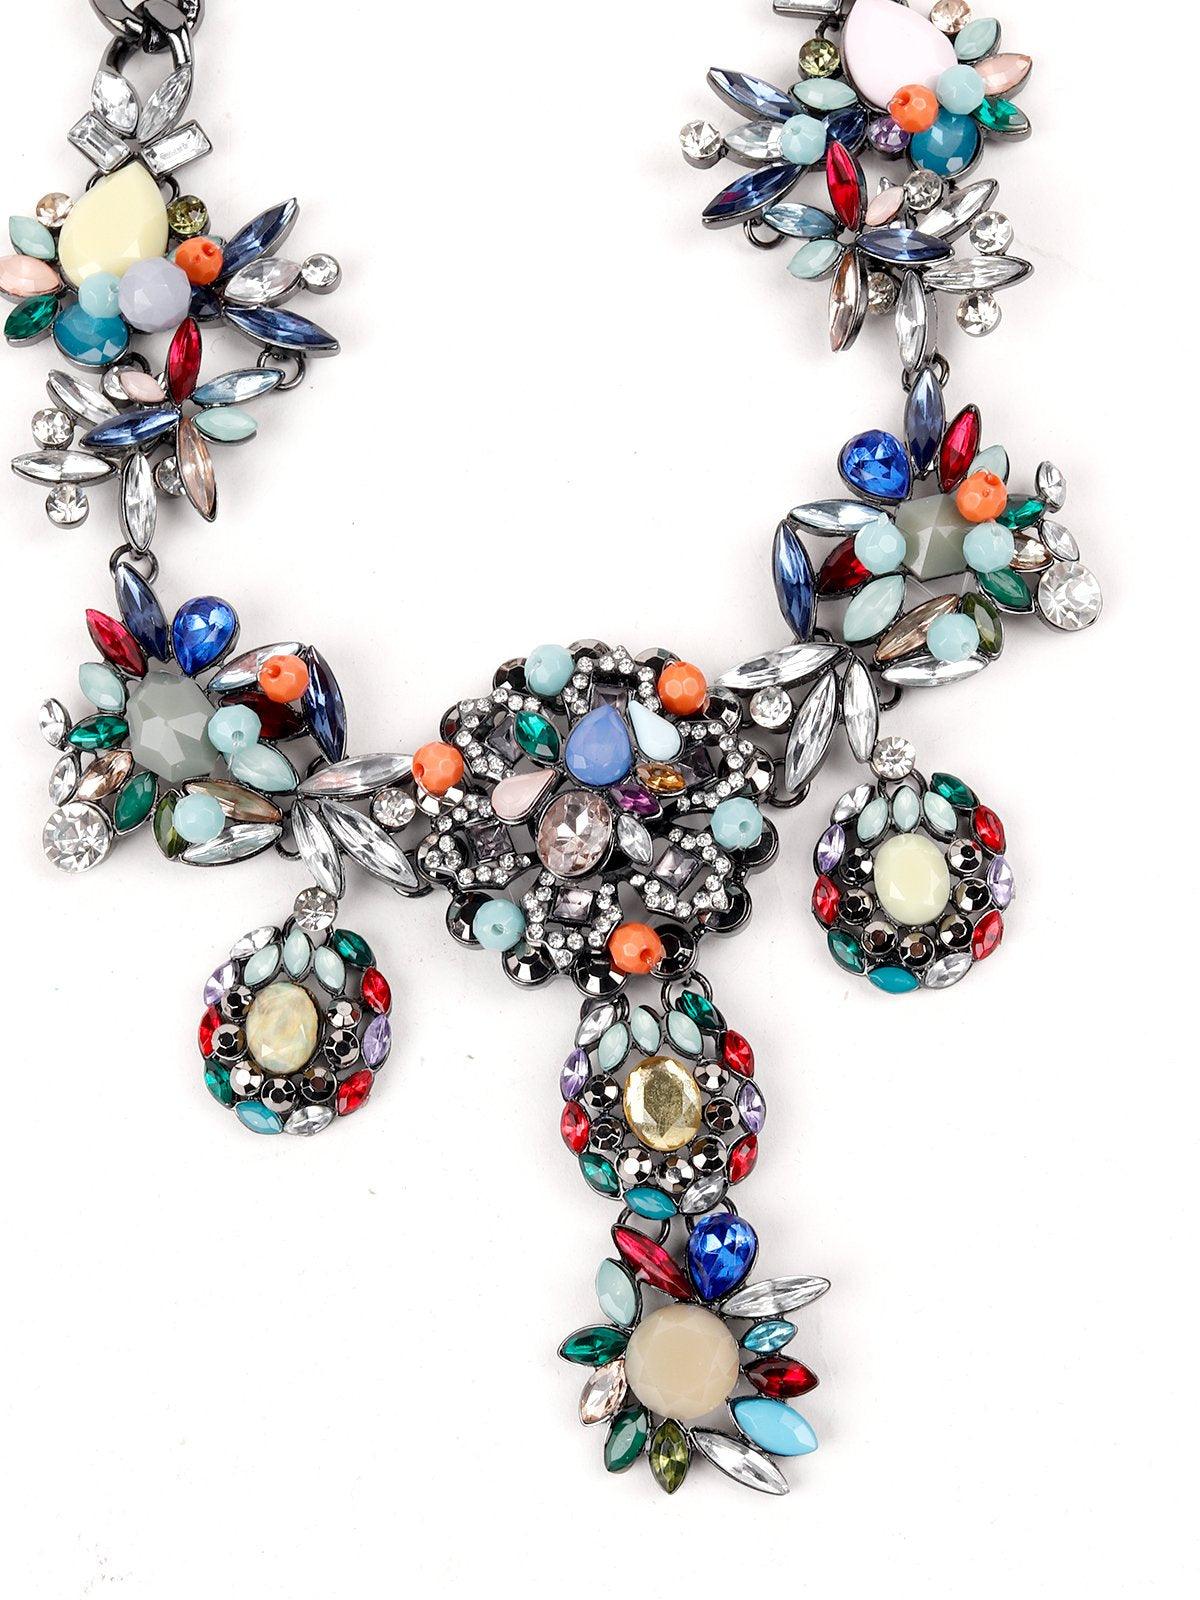 Jewel-Tone & Grey Chain Floral Necklace - Odette